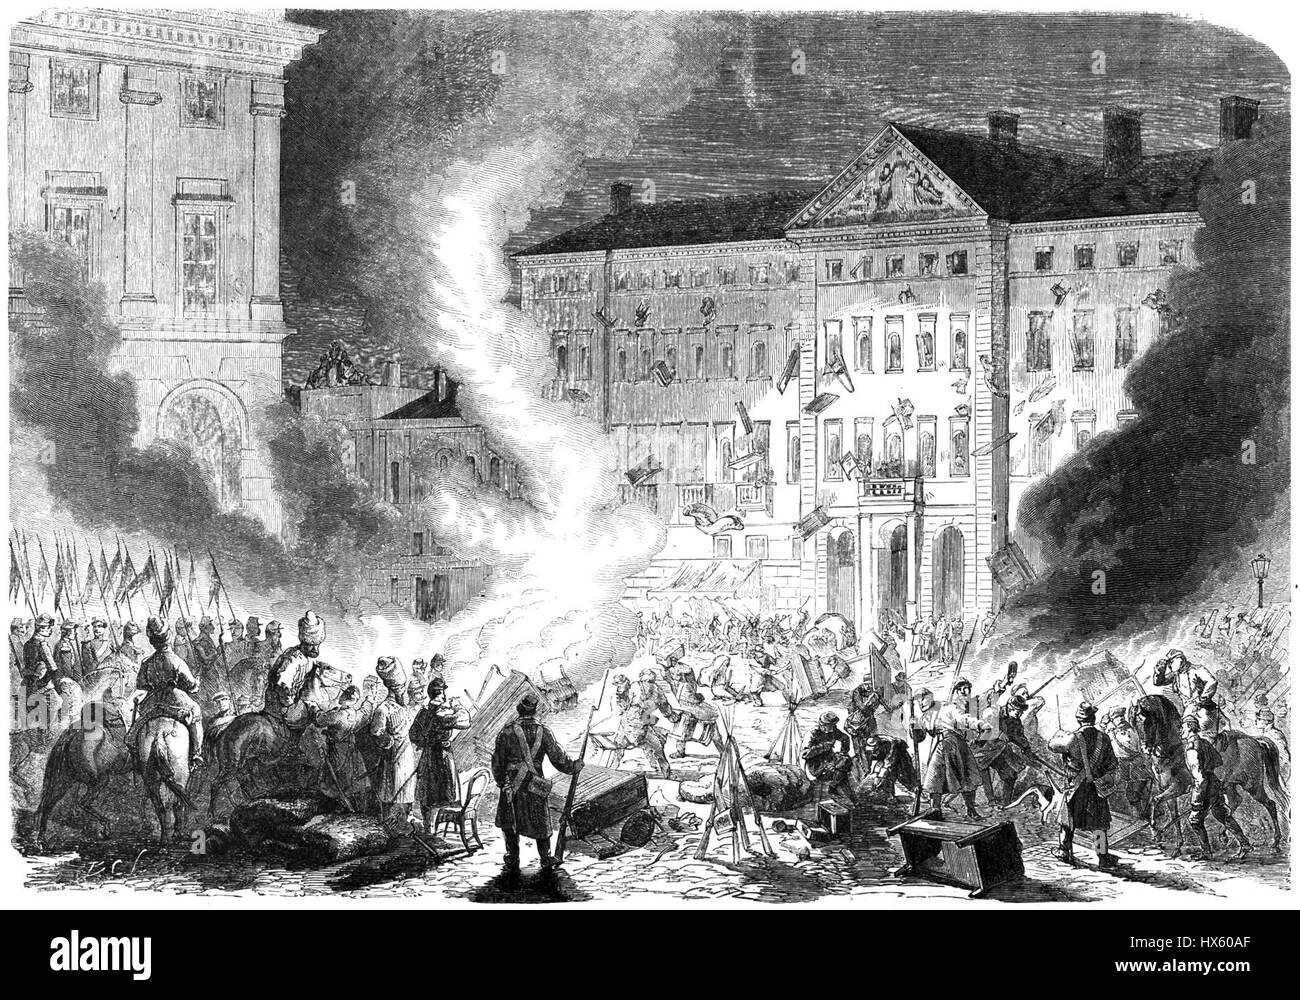 Russian Imperial Army demolishing Zamoyski Palace in Warsaw after assassination attempt 1863 Stock Photo